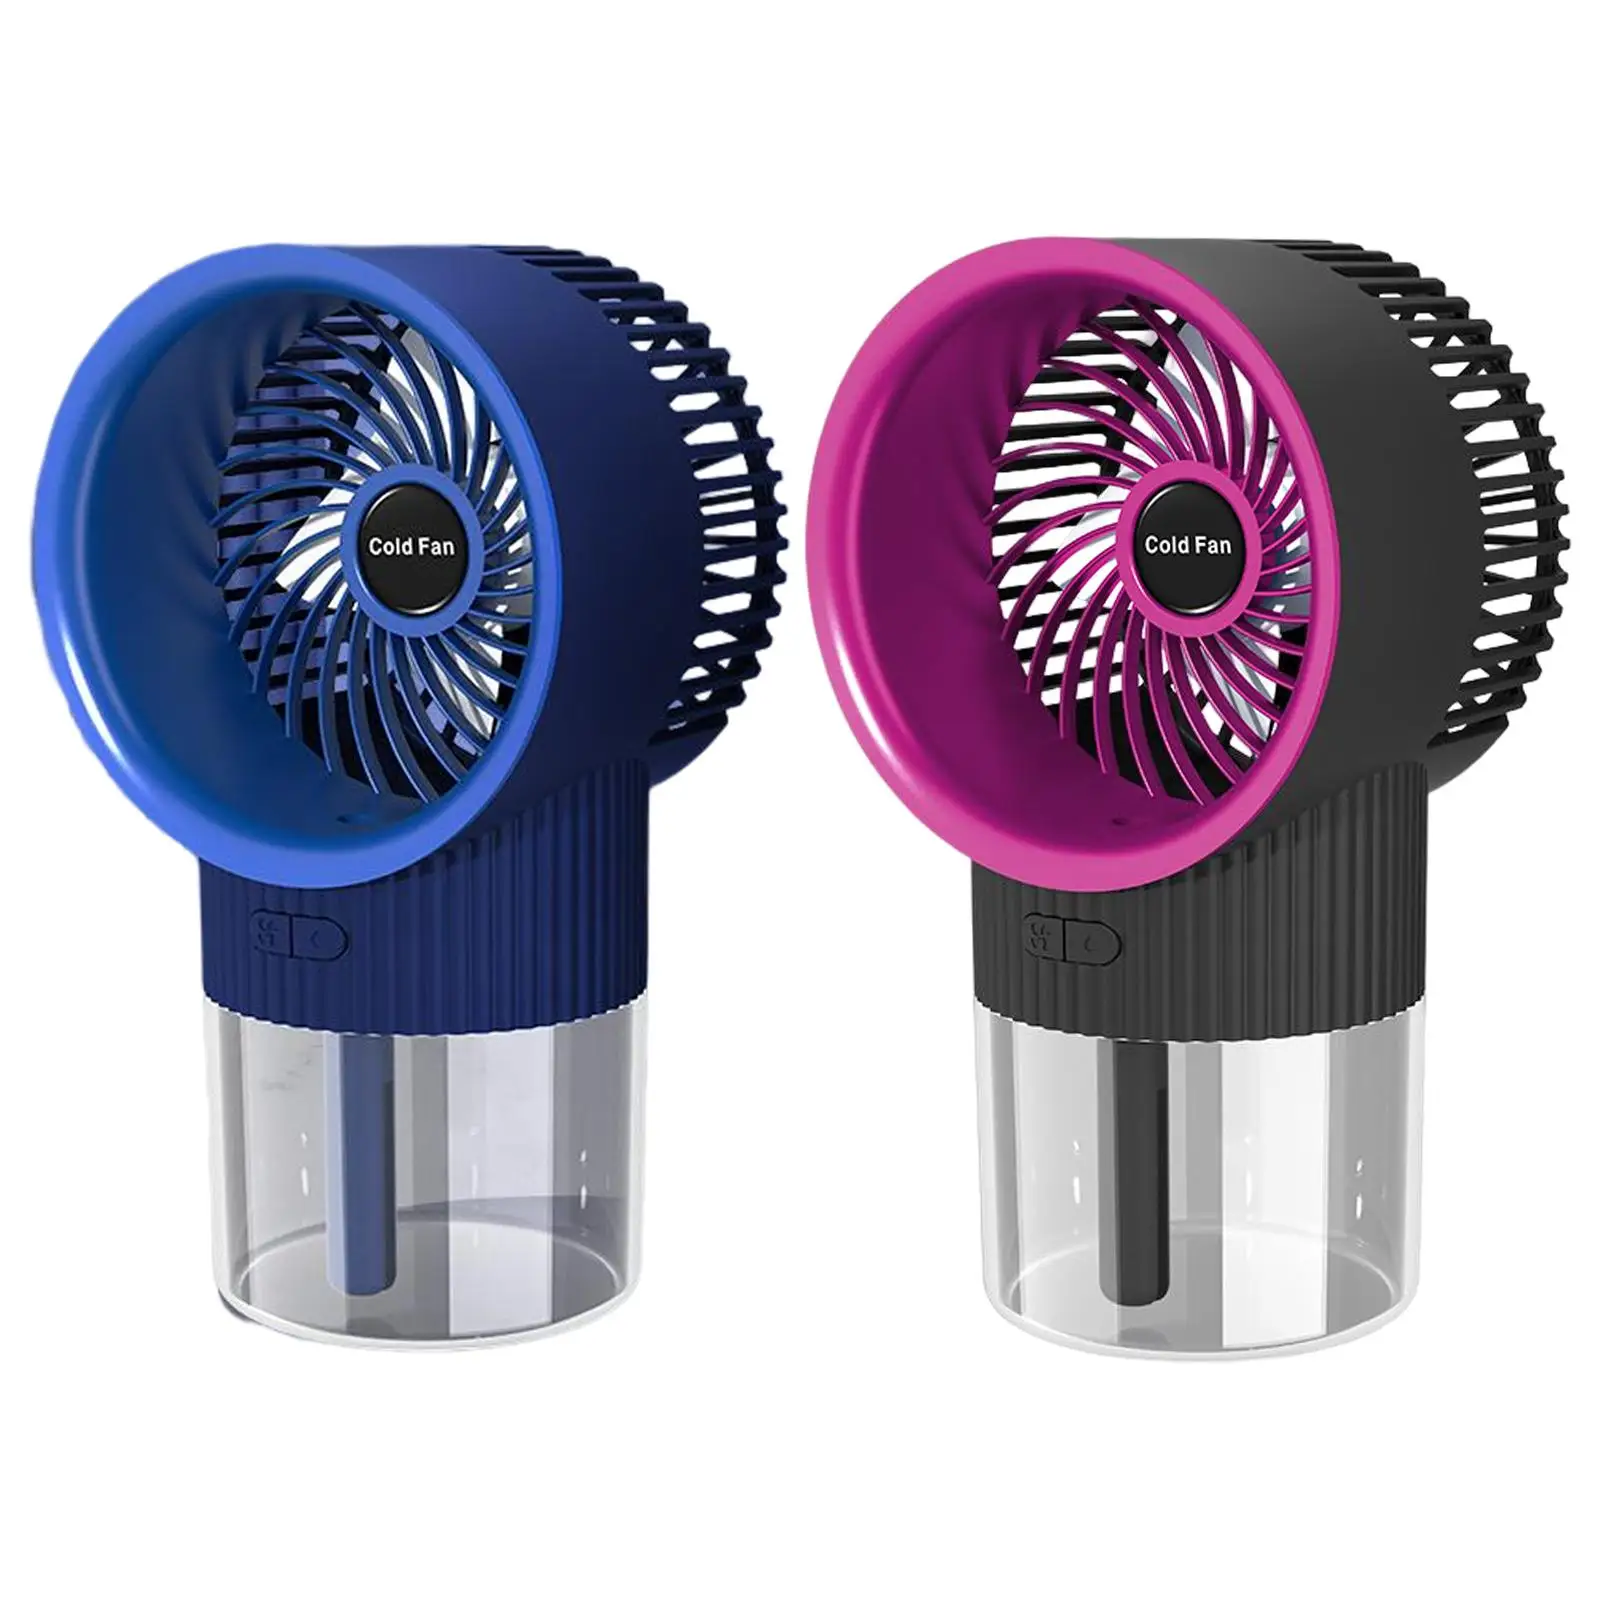 

Portable Portable Fan Table Misting Fan Electric Cooler Fan 3 Speeds USB Personal Air Conditioner Fan for Living Room Dormitory